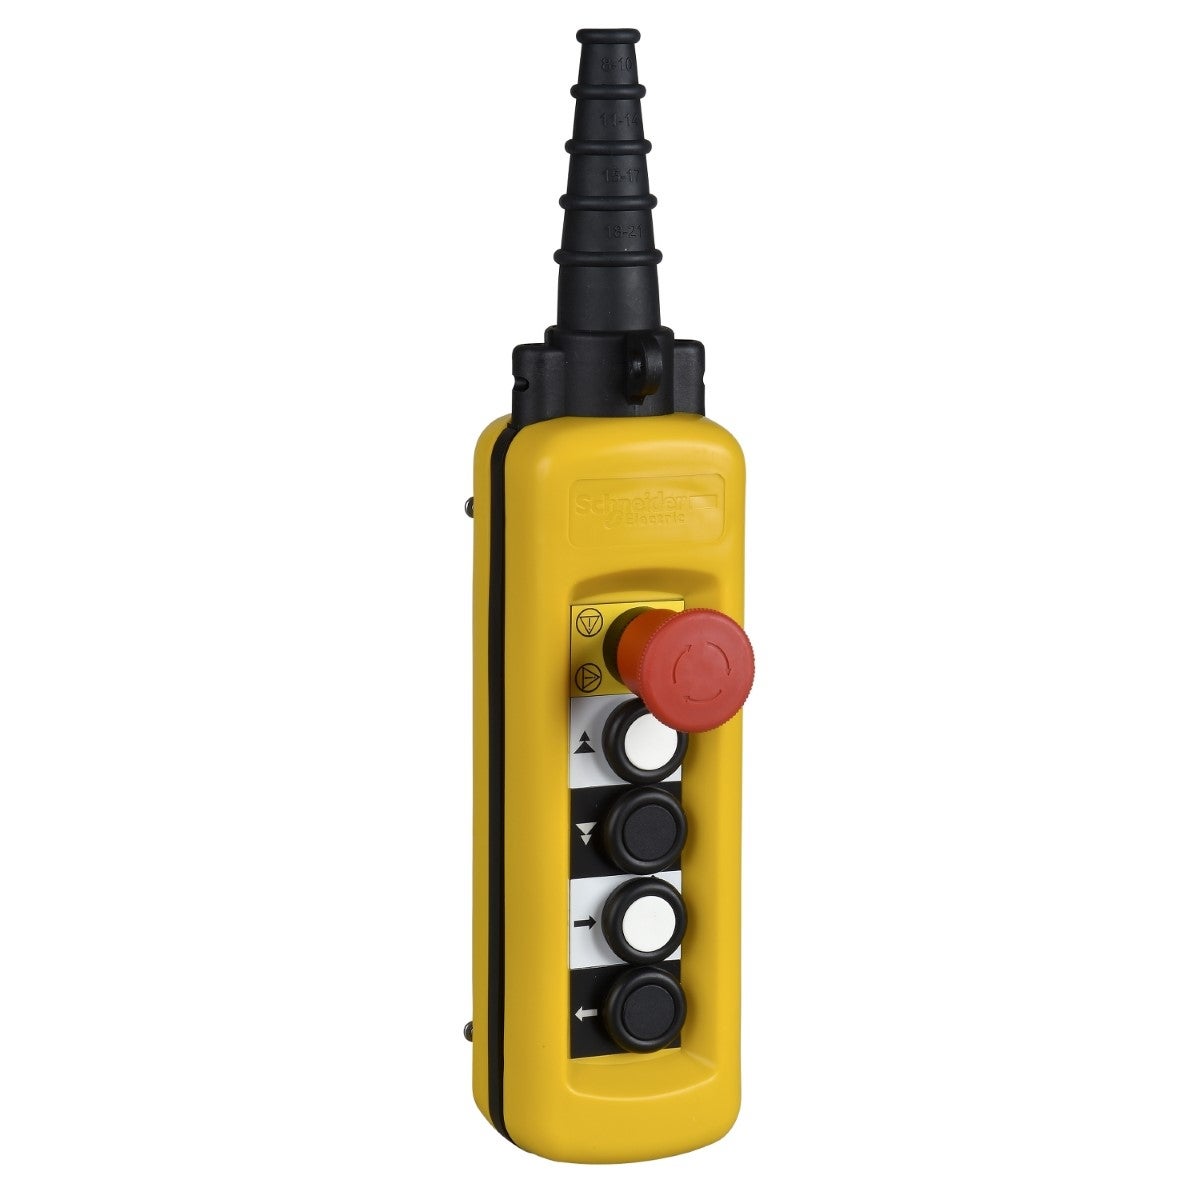 Pendant control station, Harmony XAC, plastic, yellow, 2 push buttons 2NO + 1NC, 2 push buttons with 1NO, 1 emergency stop trigger action 3NC